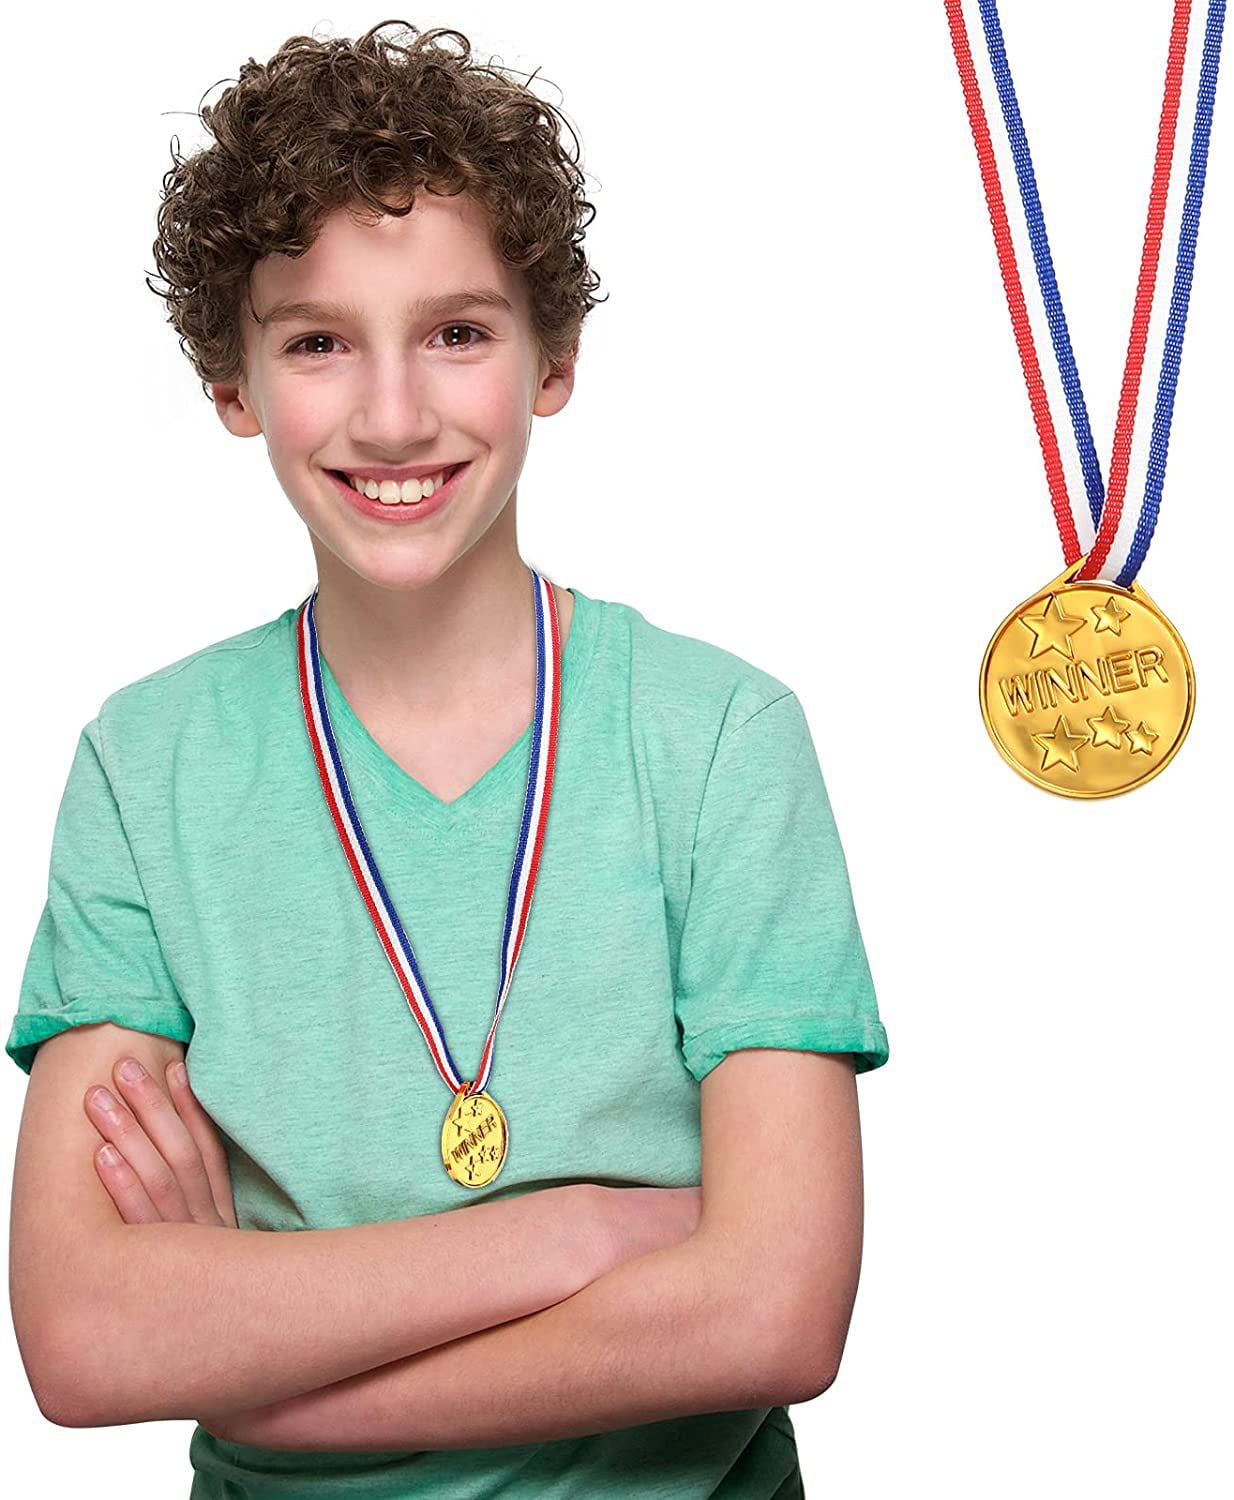 Winner Award Medals Talent Show Spelling Bee Gymnastic Birthday Party Favors Olympic Style Metal Winner Awards for Sports Competition 30 Pieces Gold Plastic Winner Award Medals 